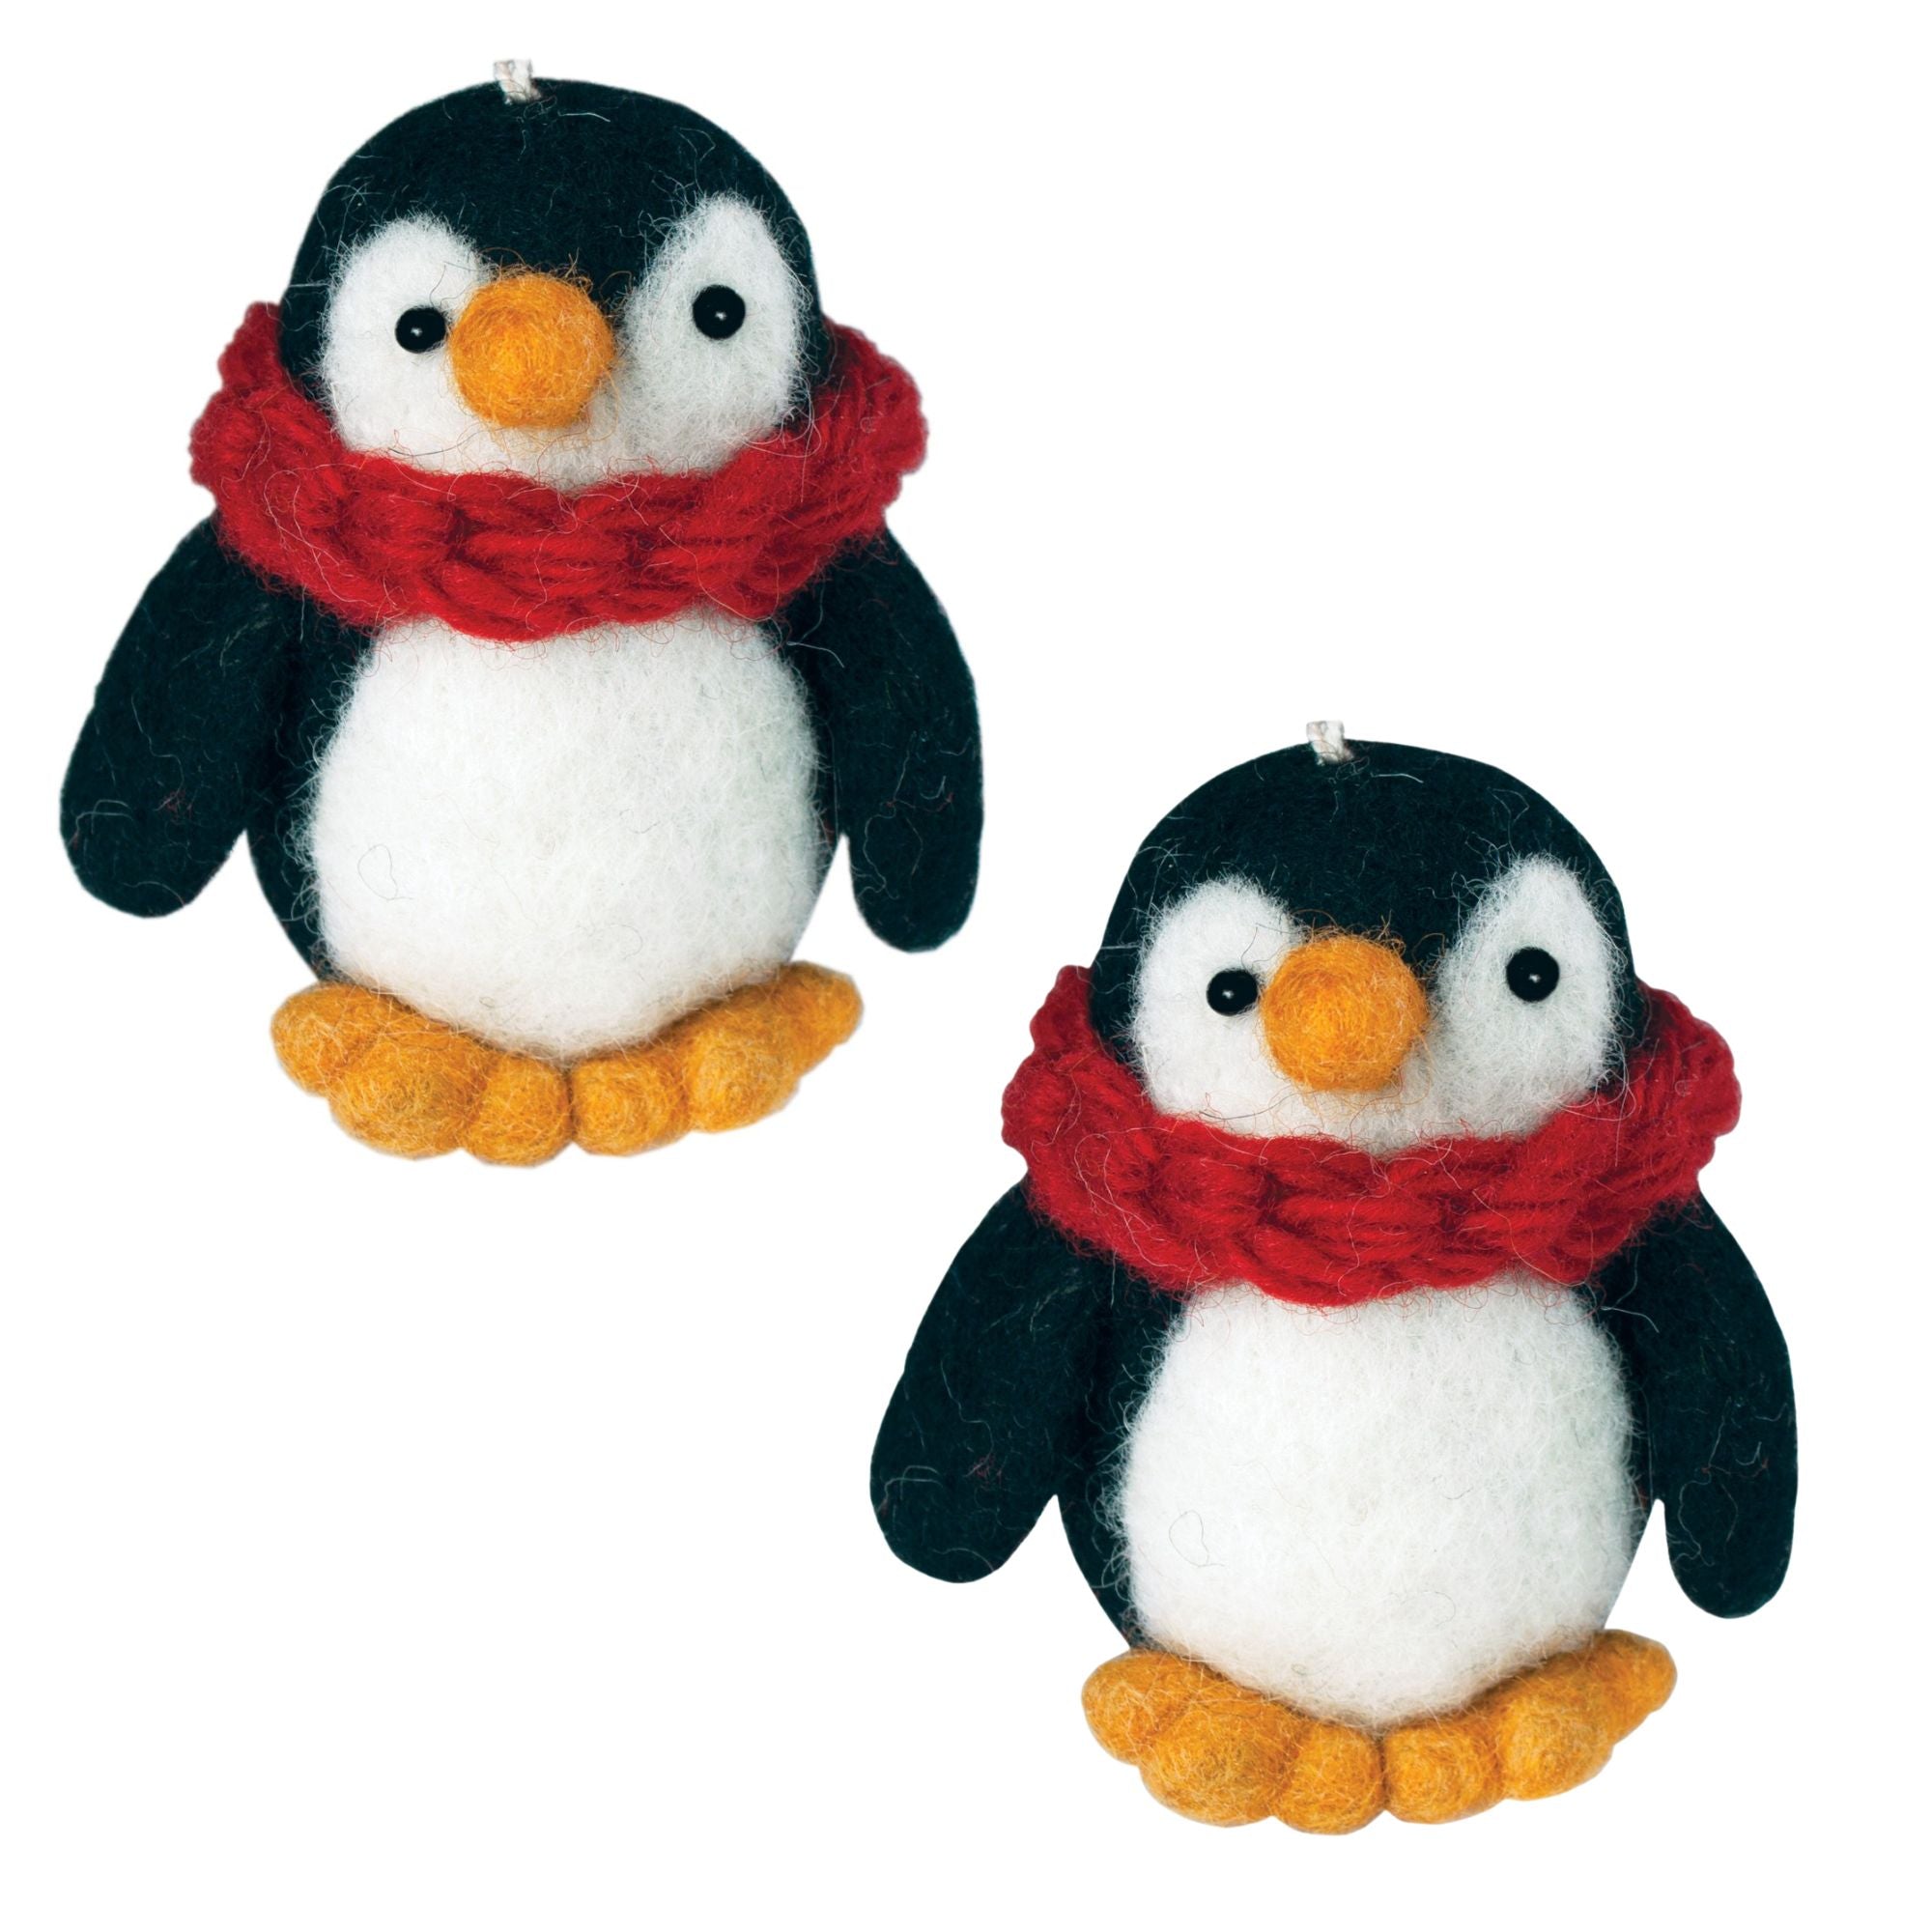 Handmade Penguin Felt Ornaments, Set of 2 - Gifts With Humanity